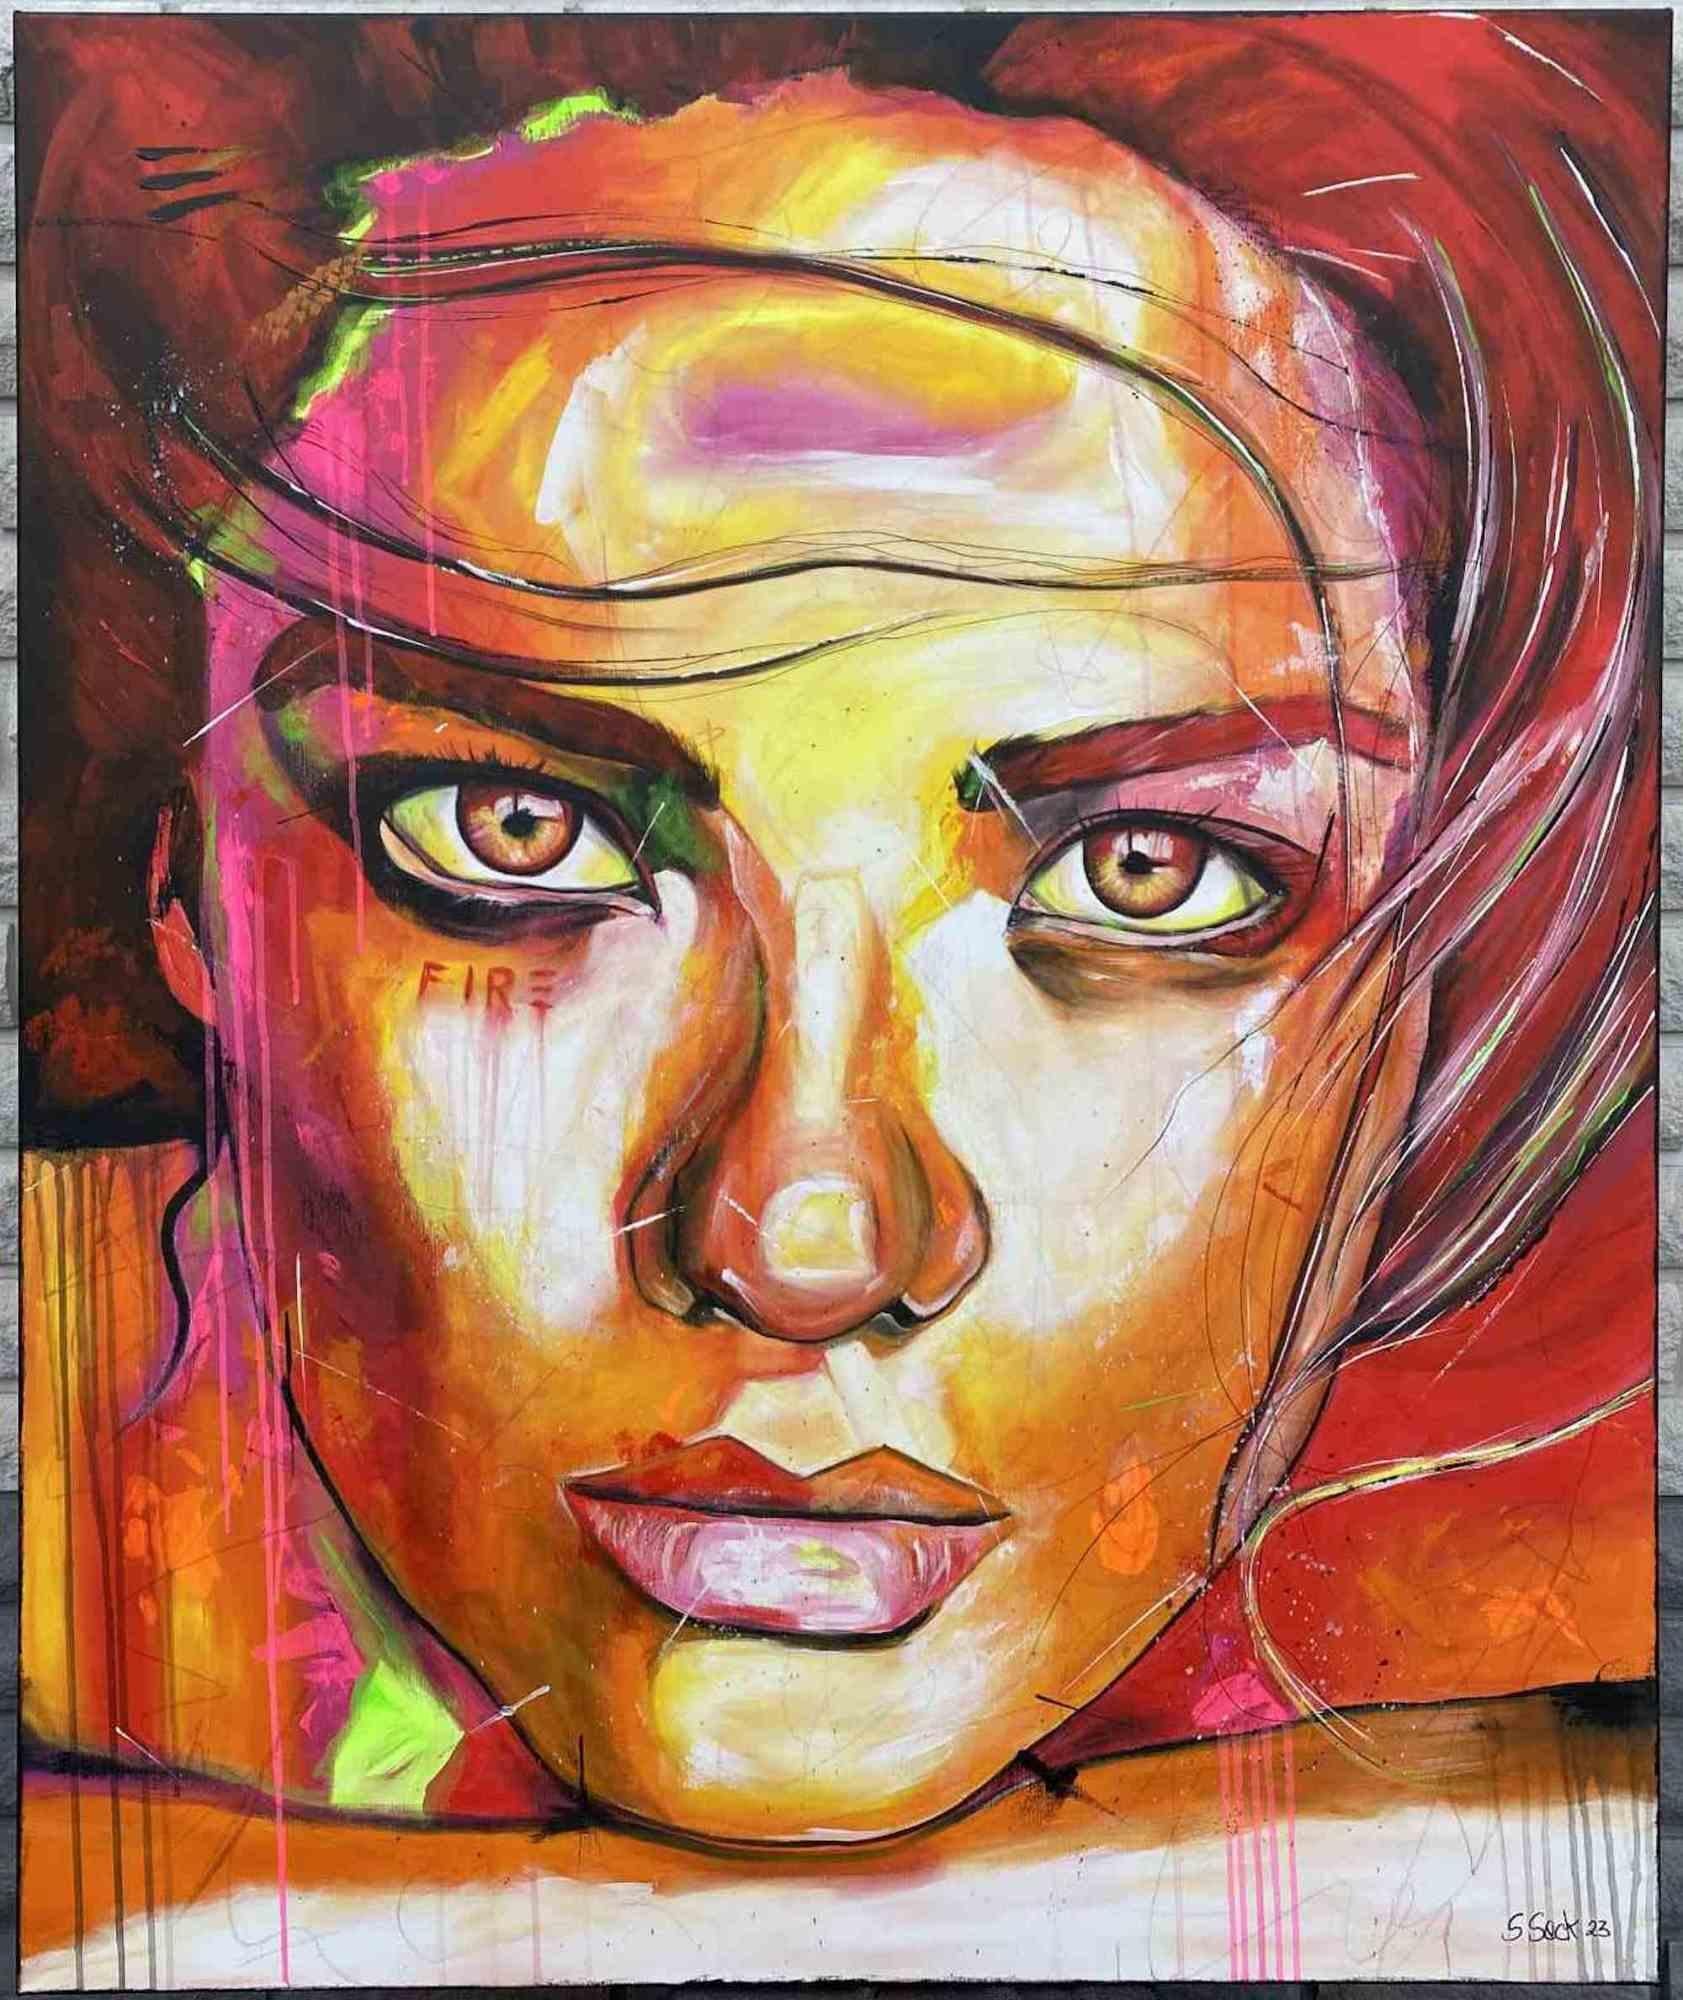 This work lives up to its title. This lady has fire in her eyes and sparks with vibrancy.

Acrylic on canvas by the Artist Sabrina Seck.

